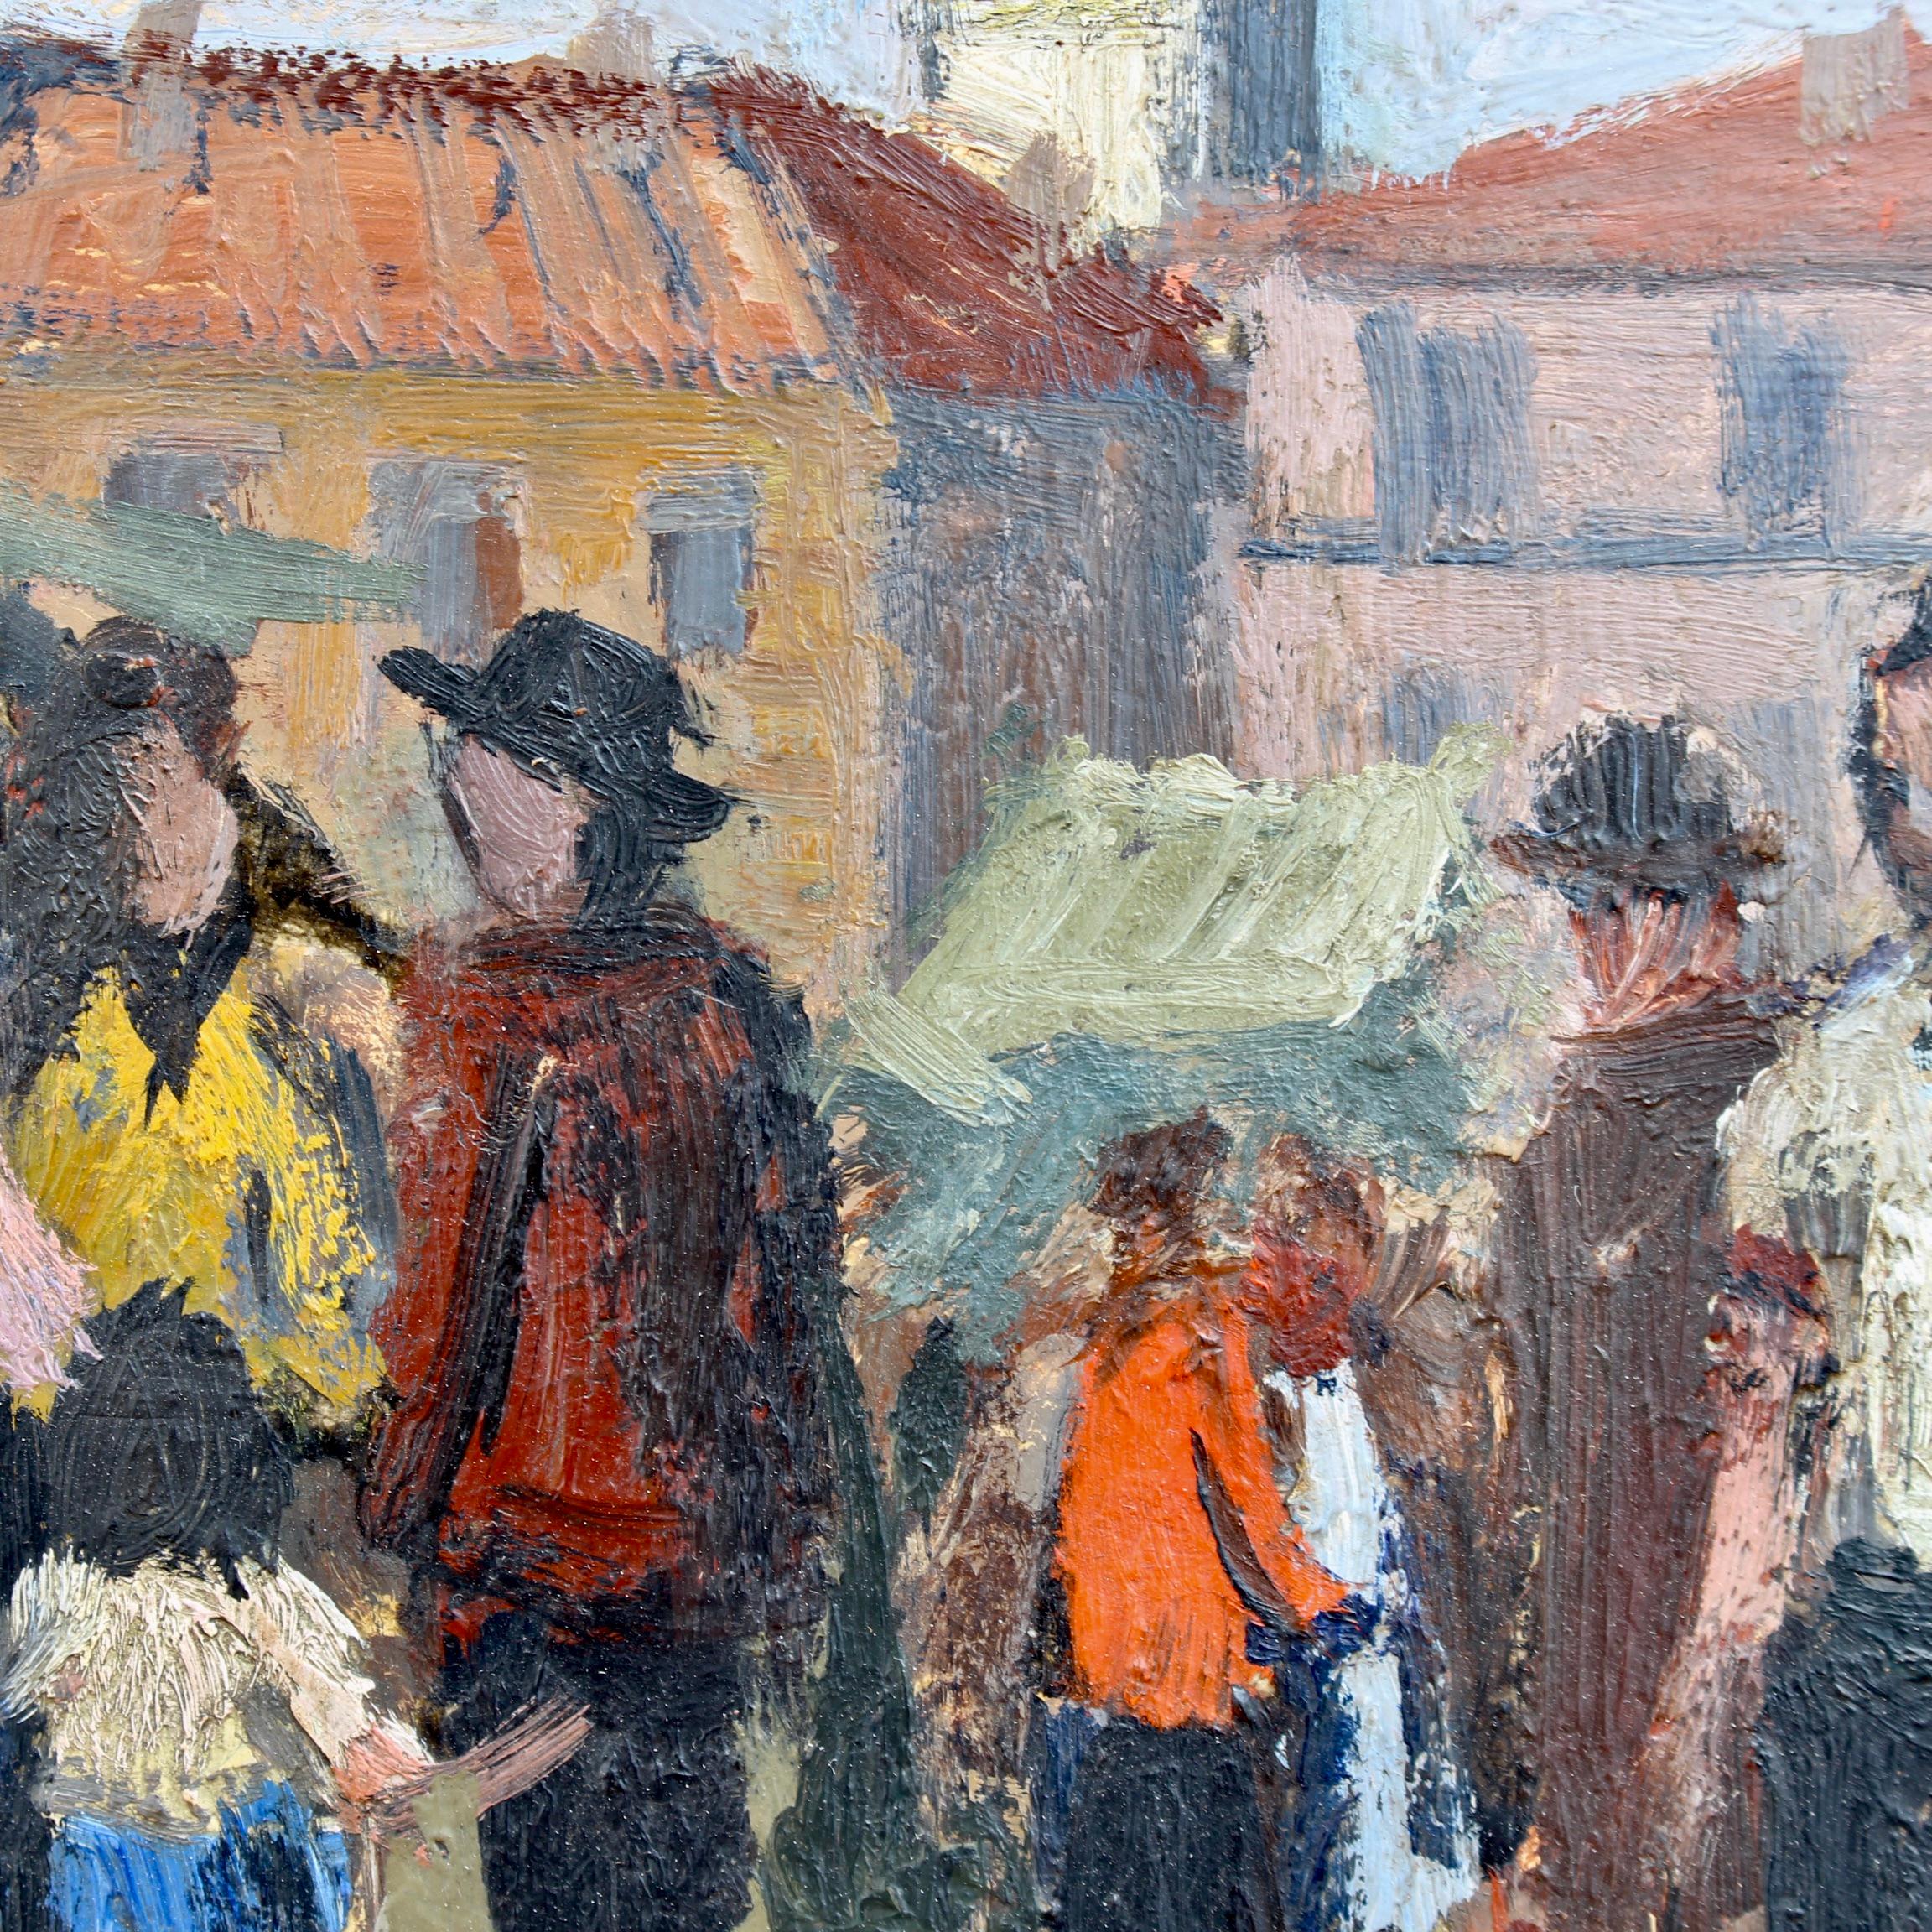 'Market Day in Piazza Grande, Locarno, Switzerland', oil on board, by unknown artist (1947-48). Locarno is an utterly charming Italian-speaking resort located on the northern shore of Lake Maggiore, nestled at the foot of the Alps. A hidden gem,